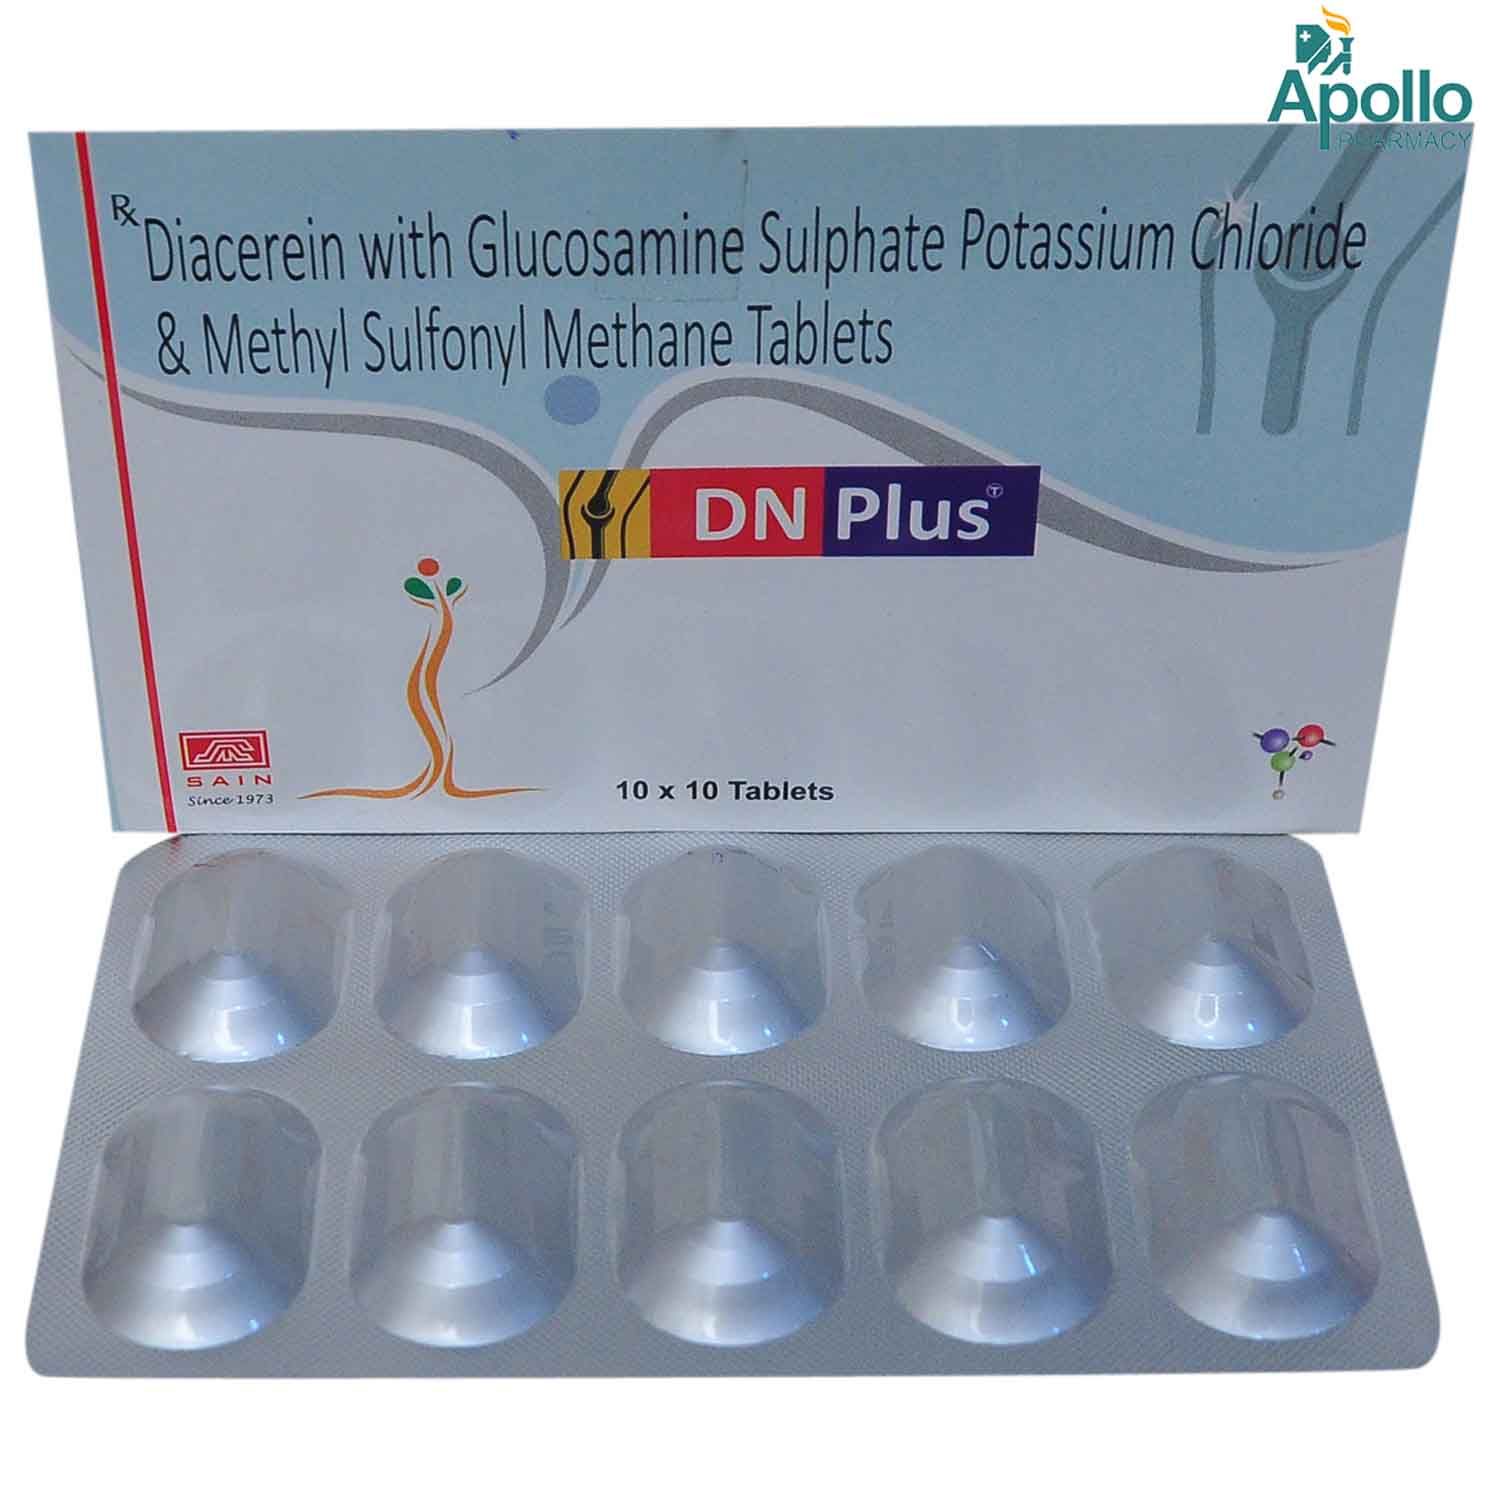 DN PLUS TABLET, Pack of 10 TABLETS